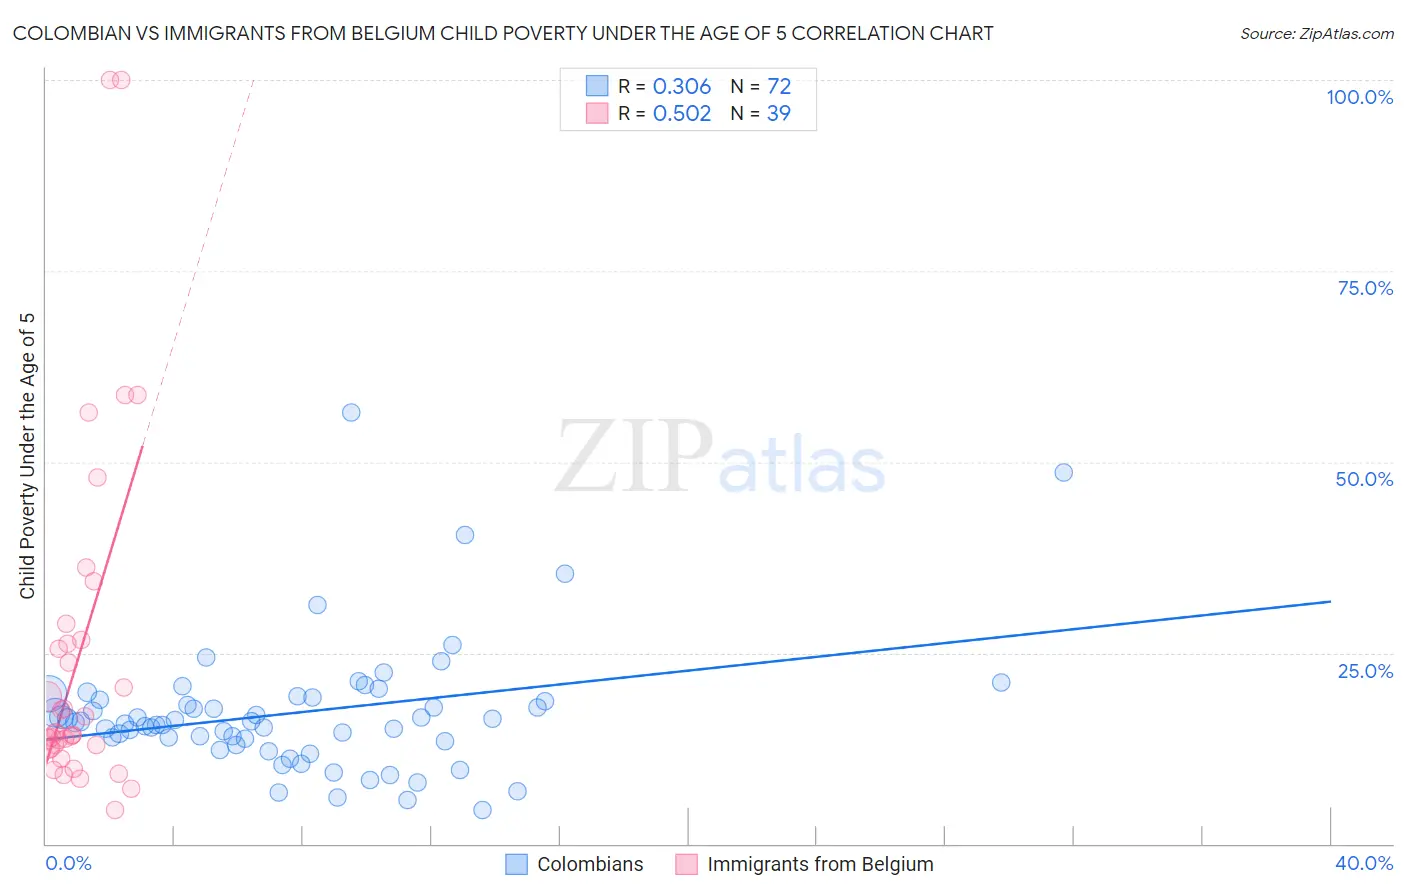 Colombian vs Immigrants from Belgium Child Poverty Under the Age of 5